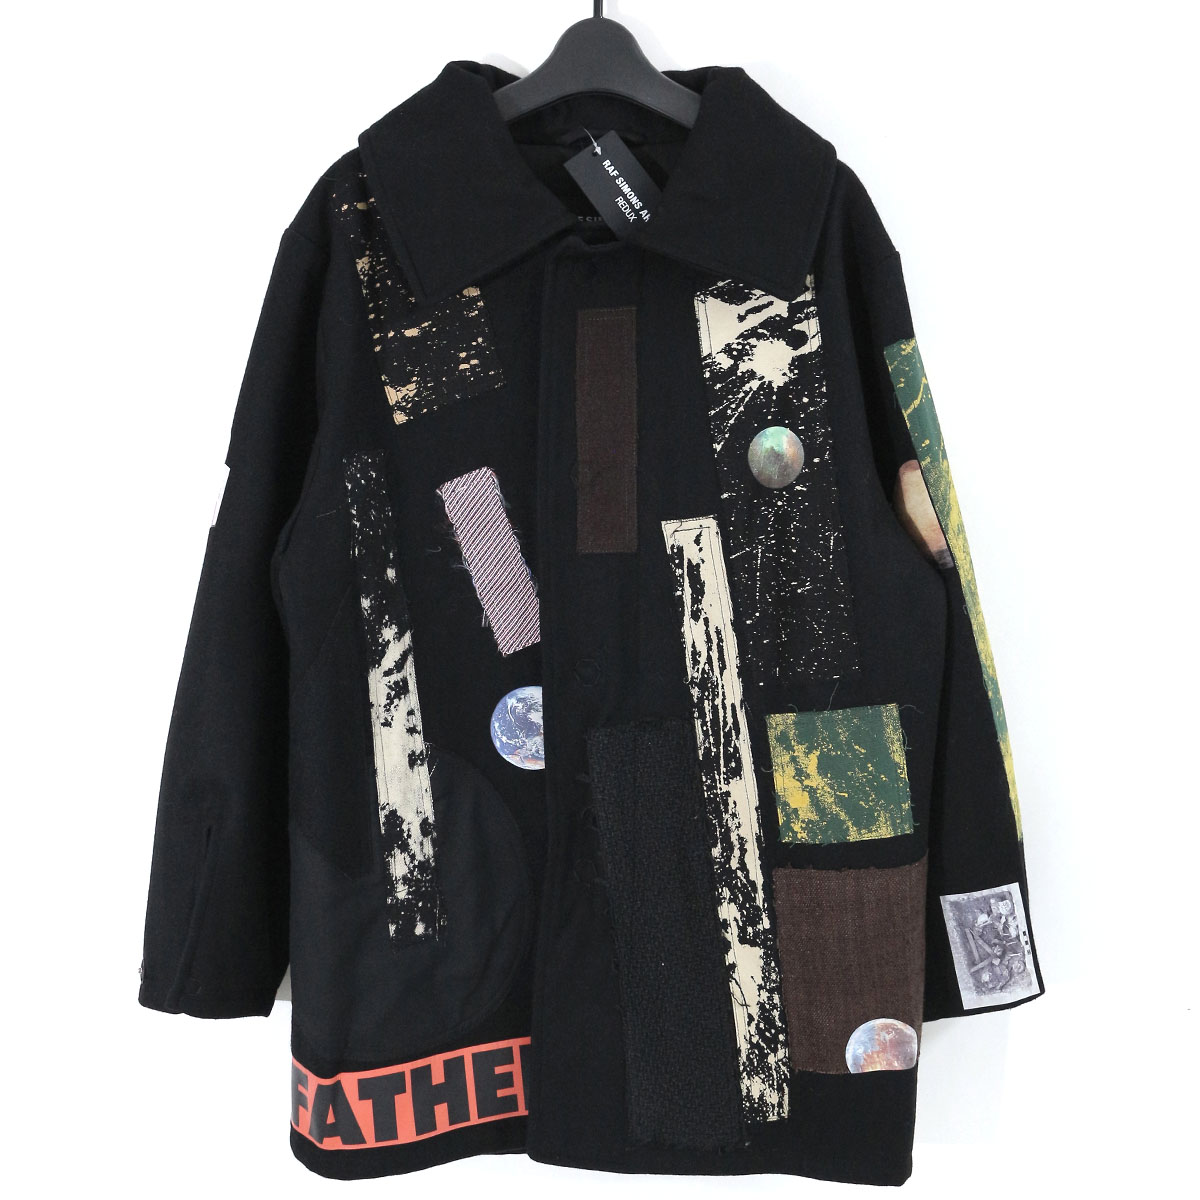 RAF SIMONS STERLING RUBY ARCHIVE REDUX ラフシモンズ スターリングルビー アーカイブ リダックス 2014AW 復刻 Large sterling caban with patches マルチパッチ&プリントウールコート 44 A01-608-20023-00099